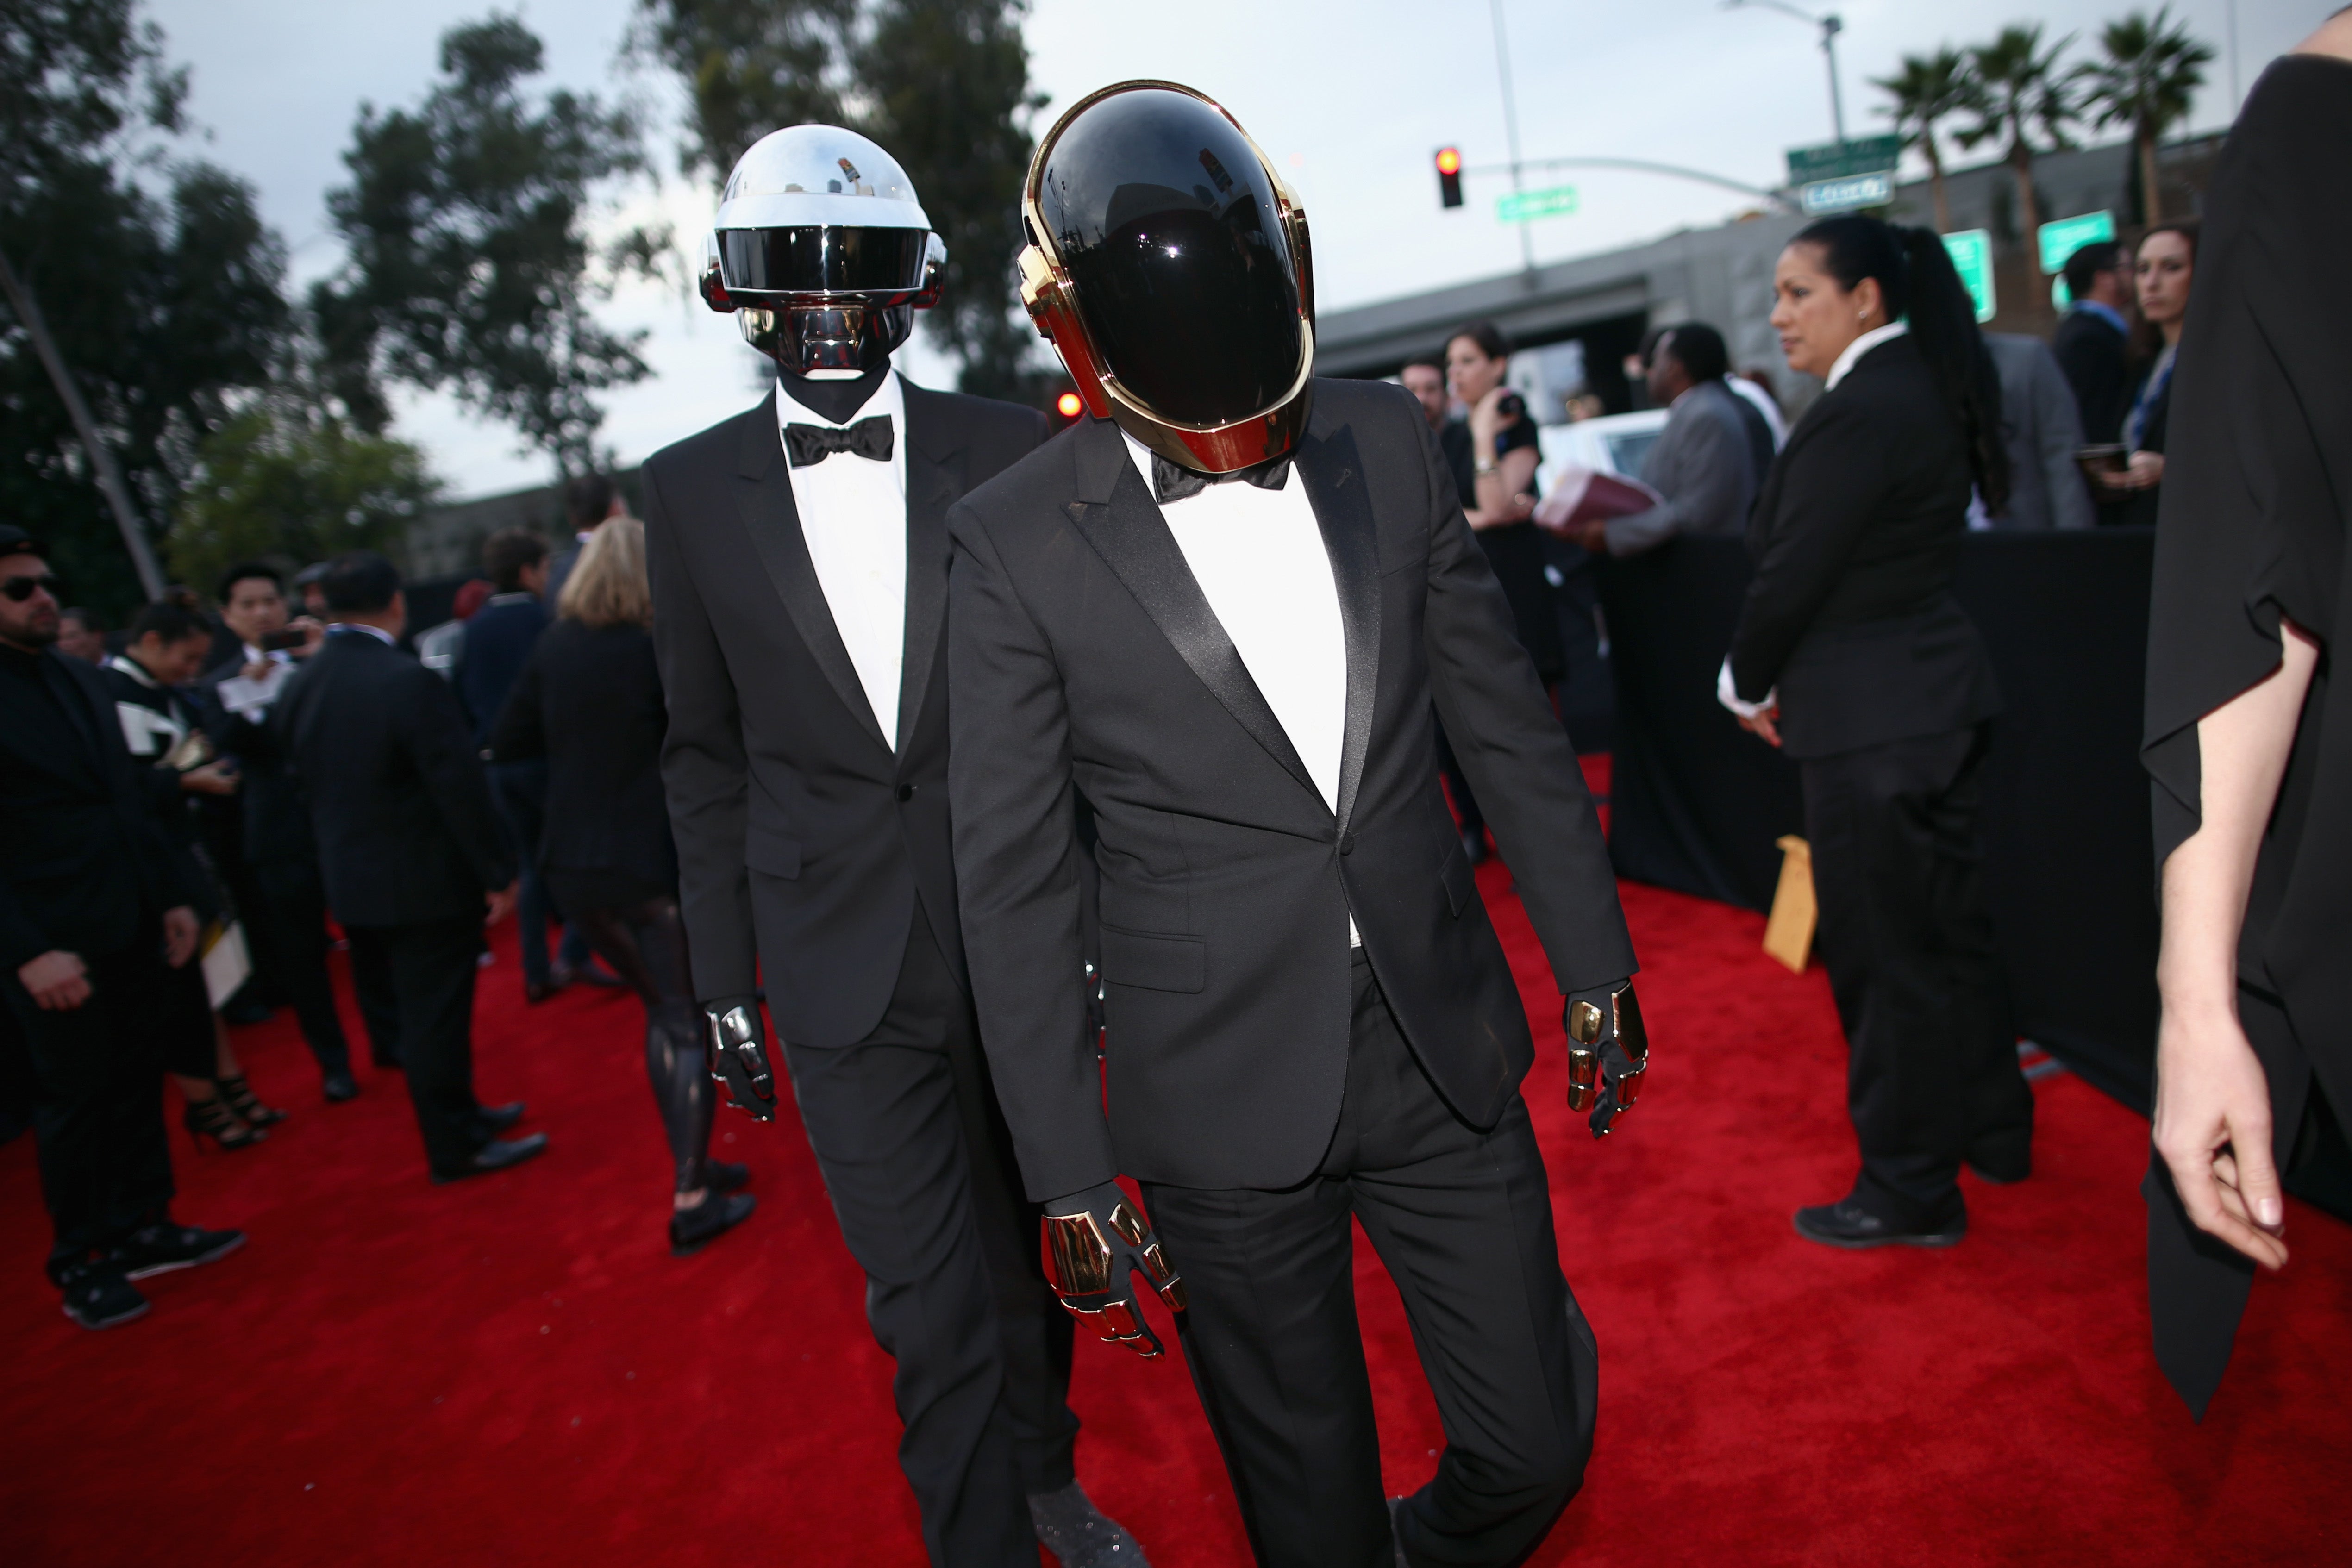 LOS ANGELES, CA - JANUARY 26: Recording artists Daft Punk attend the 56th GRAMMY Awards at Staples Center on January 26, 2014 in Los Angeles, California. (Photo by Christopher Polk/Getty Images for NARAS)